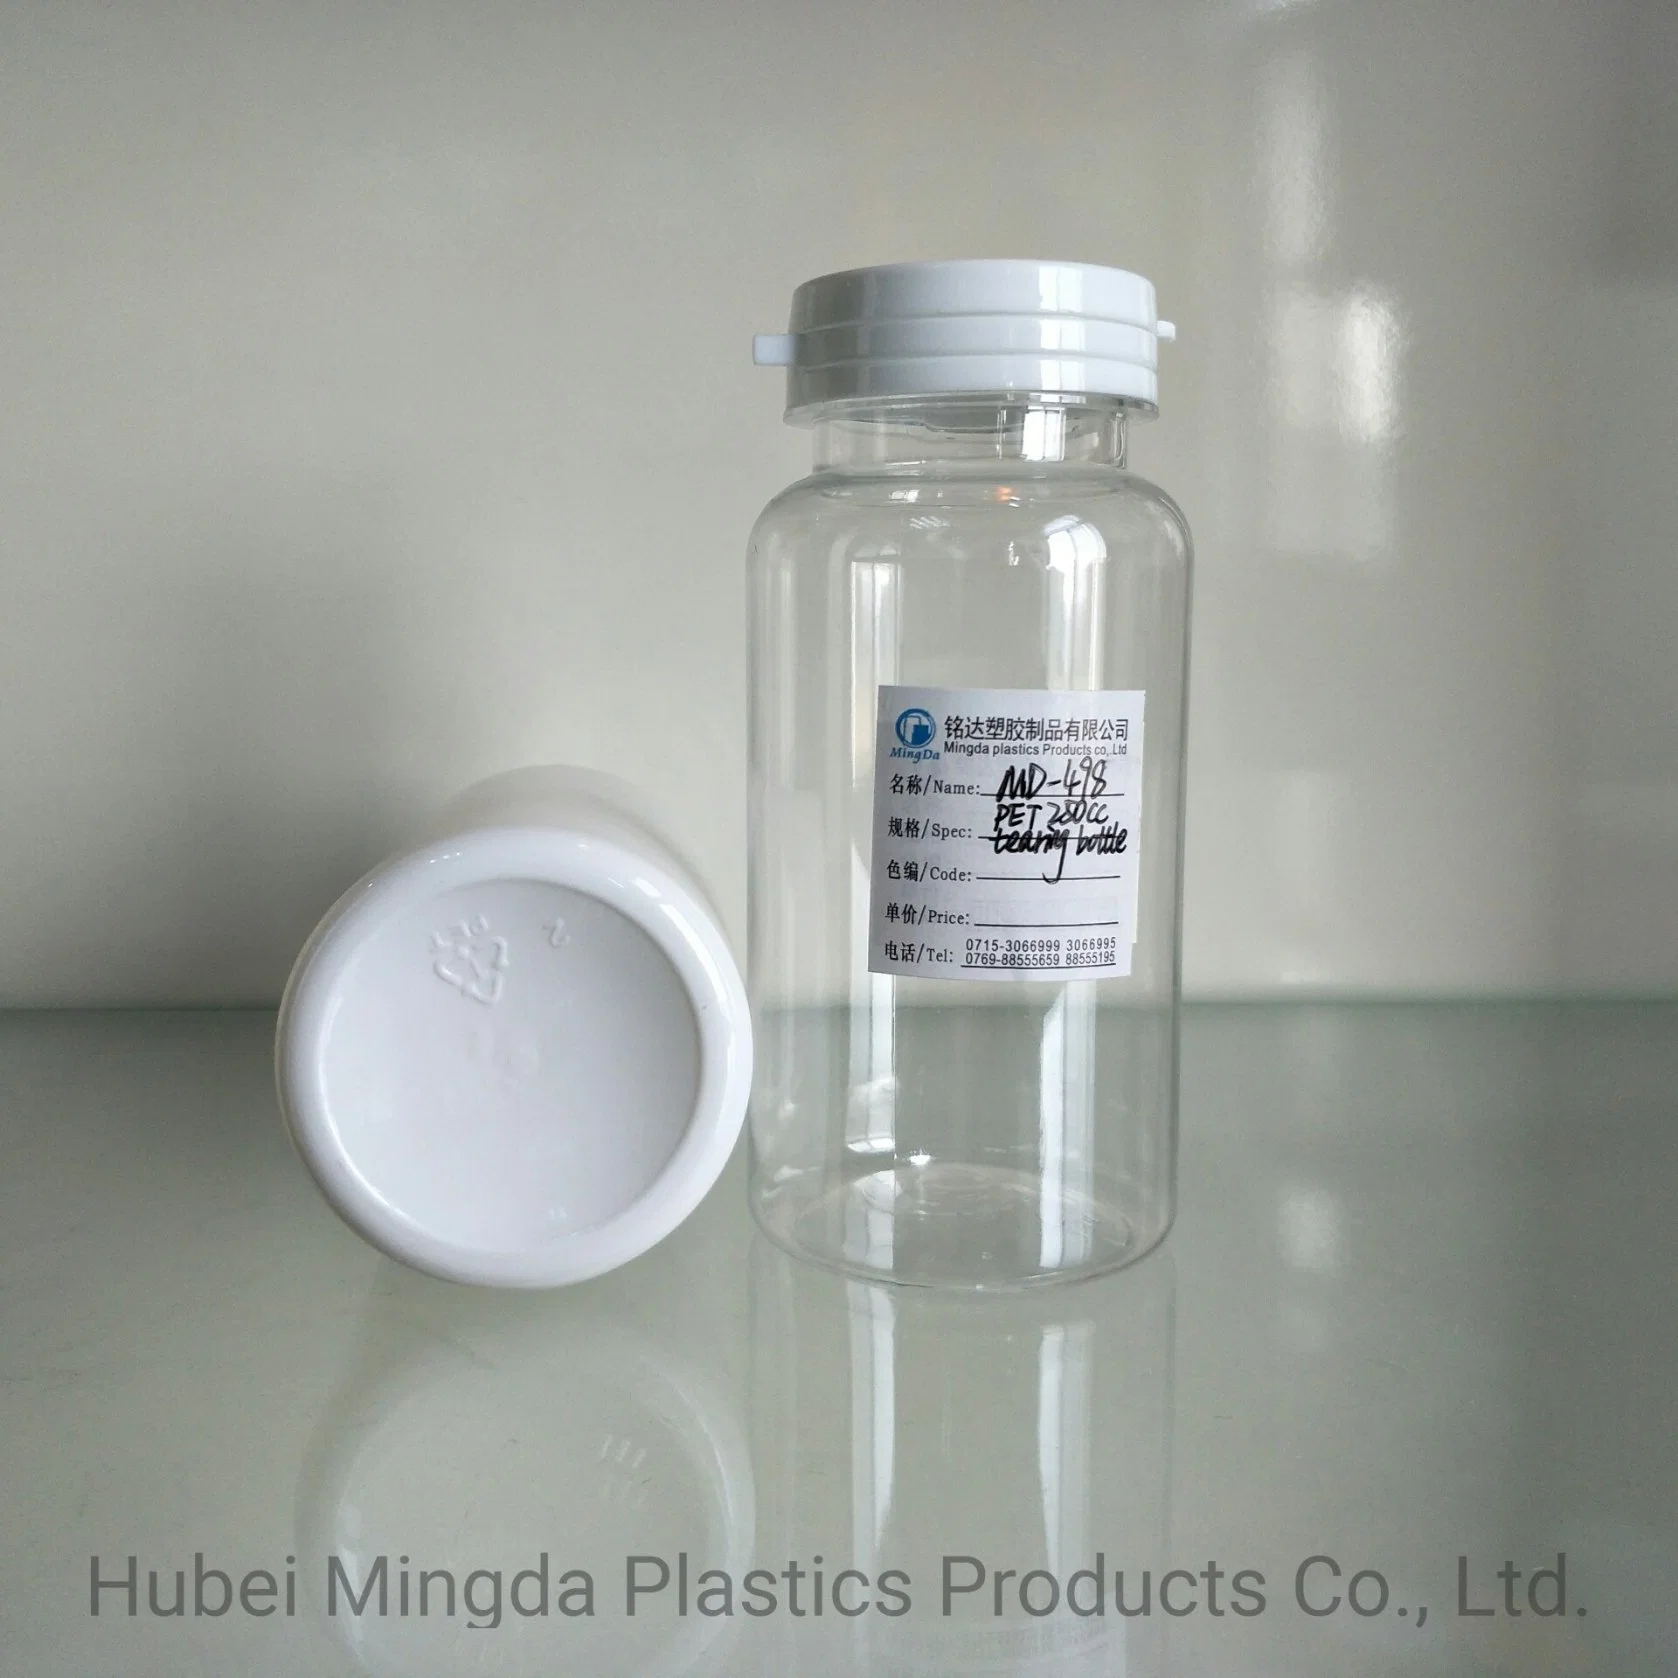 Pet/HDPE MD-498 200ml Plastic Bottle for Medicine/Food/Health Care Products Packaging